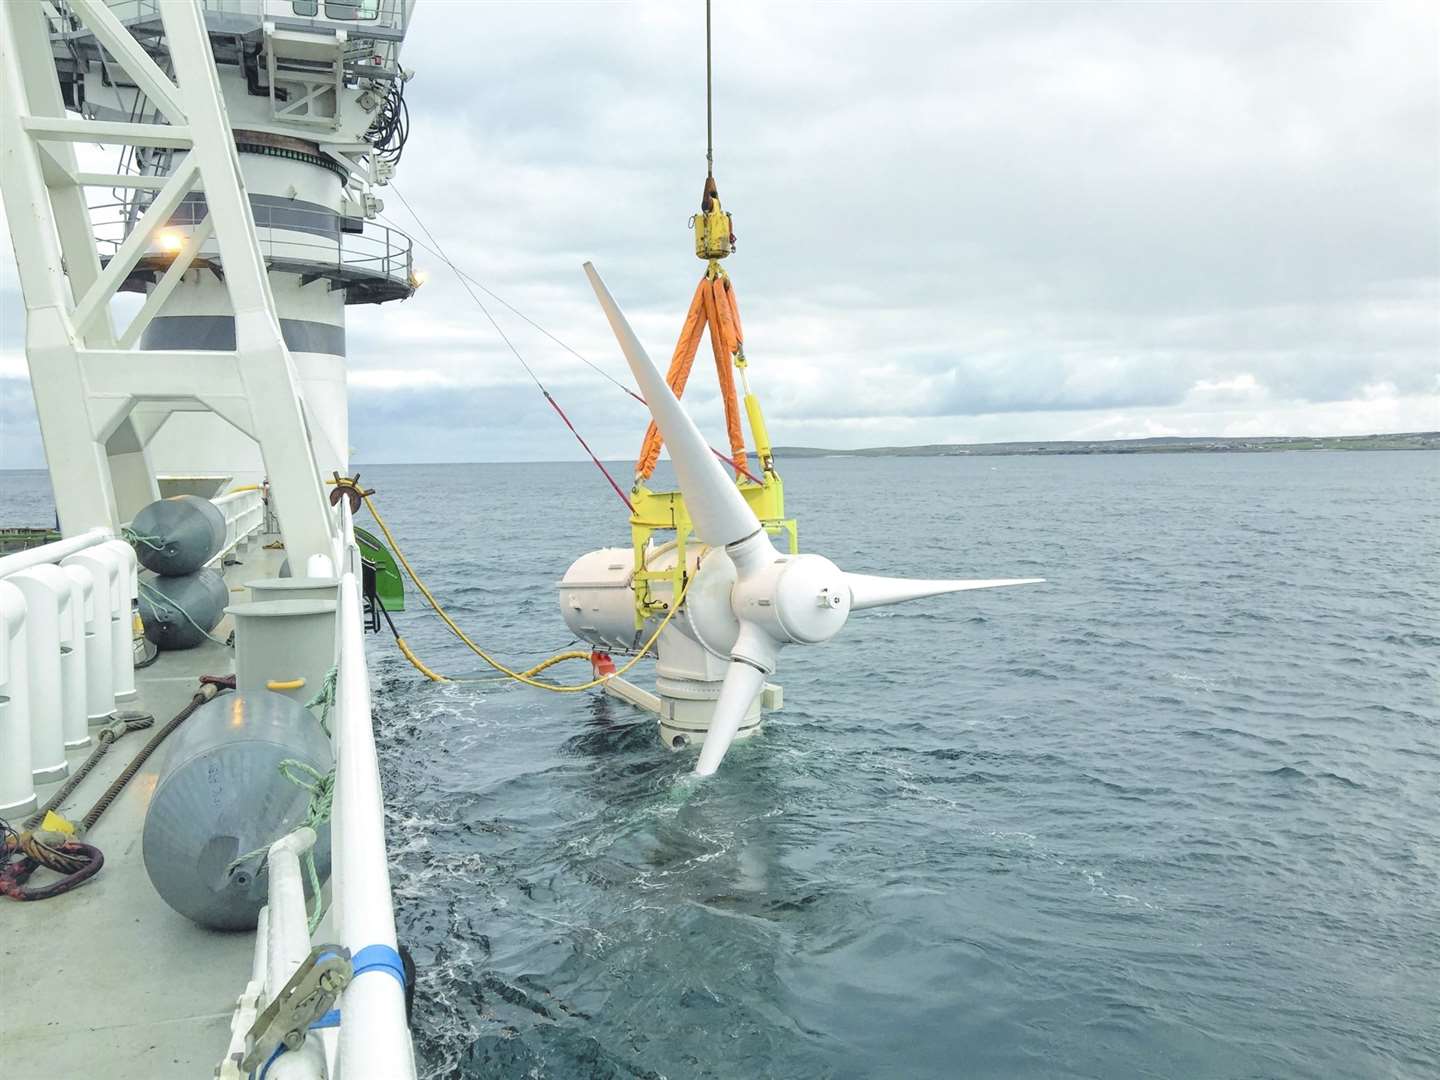 The Scottish Government wants to invest in green industries such as tidal energy as part of the Covid-19 recovery.